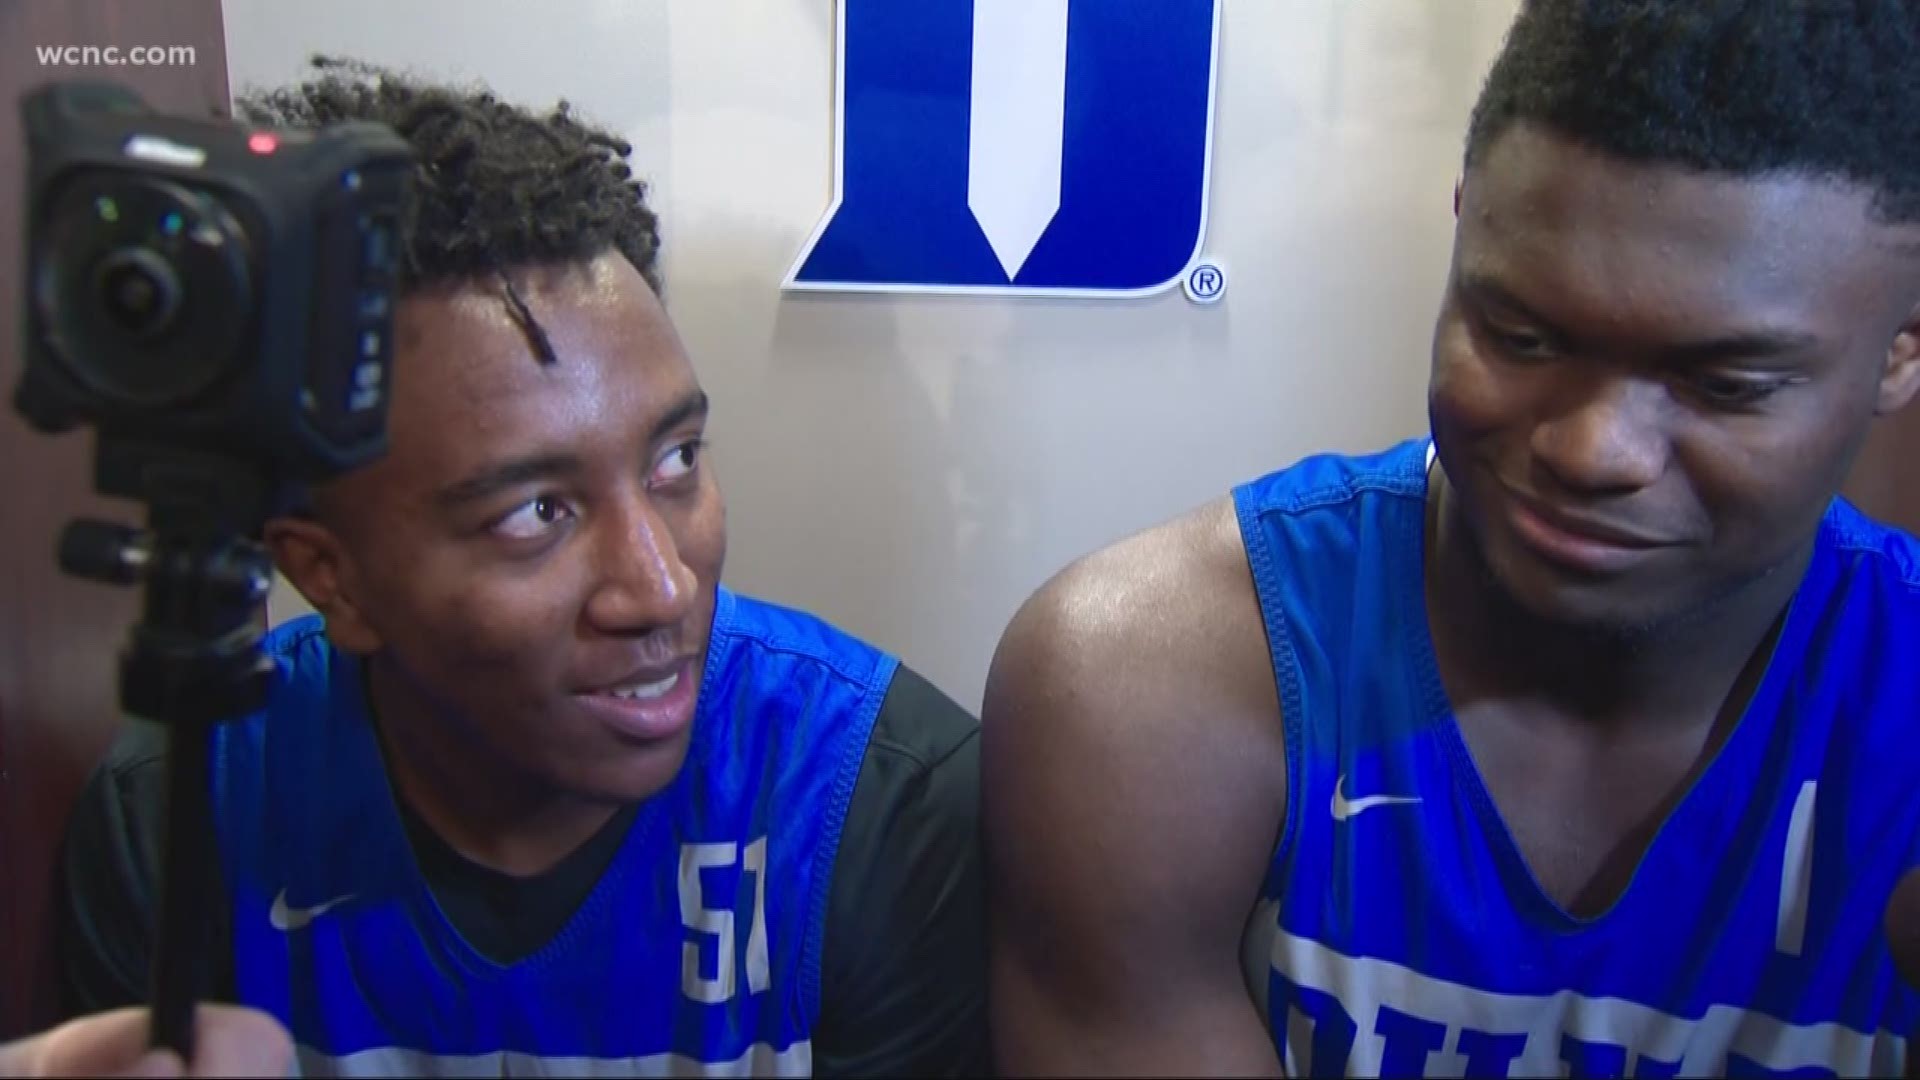 With the tournament hype growing, media have often been following Duke standout Zion around the locker room, where he often sits with lesser-known teammate Michael Buckmire to get him some face time.